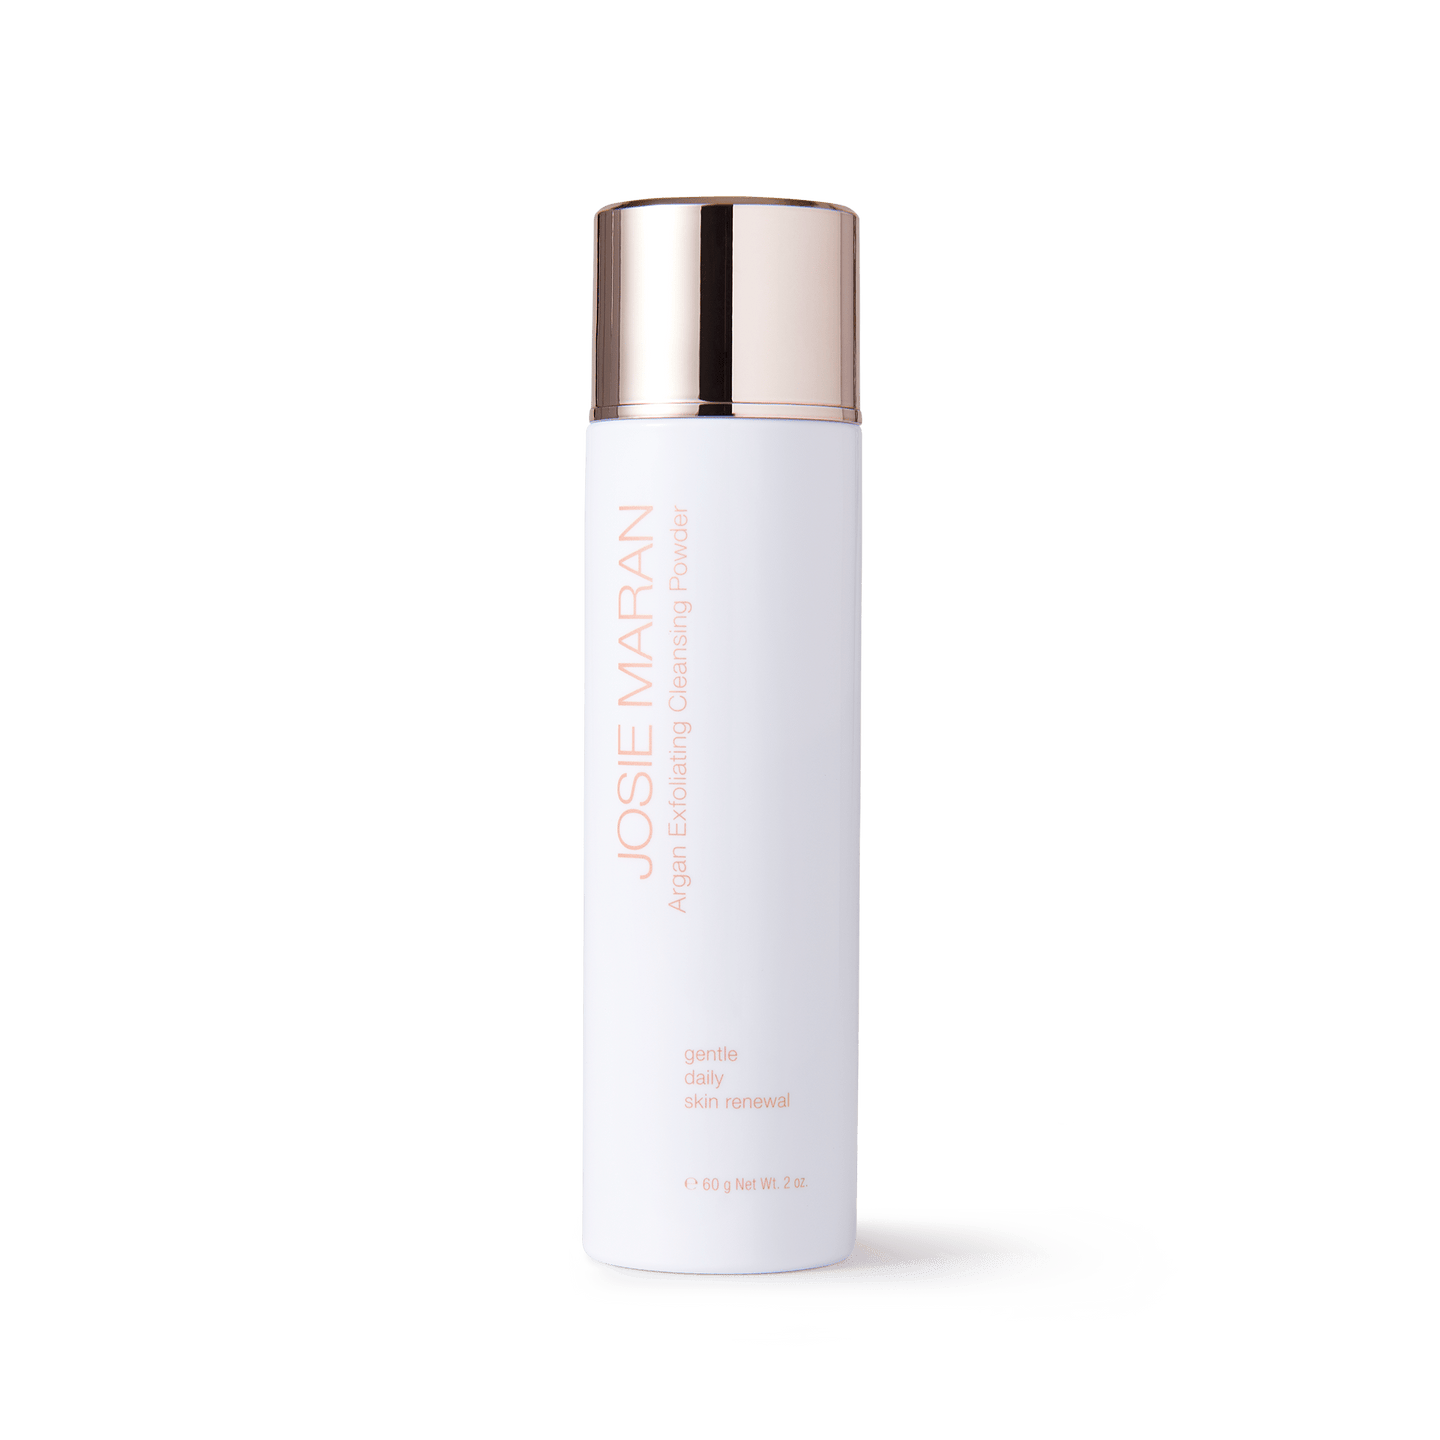 Josie Maran Argan Exfoliating Cleansing Powder - Gently Lifts Dead Skin for Brighter, Softer and More Youthful-Looking Skin (60g/2oz)